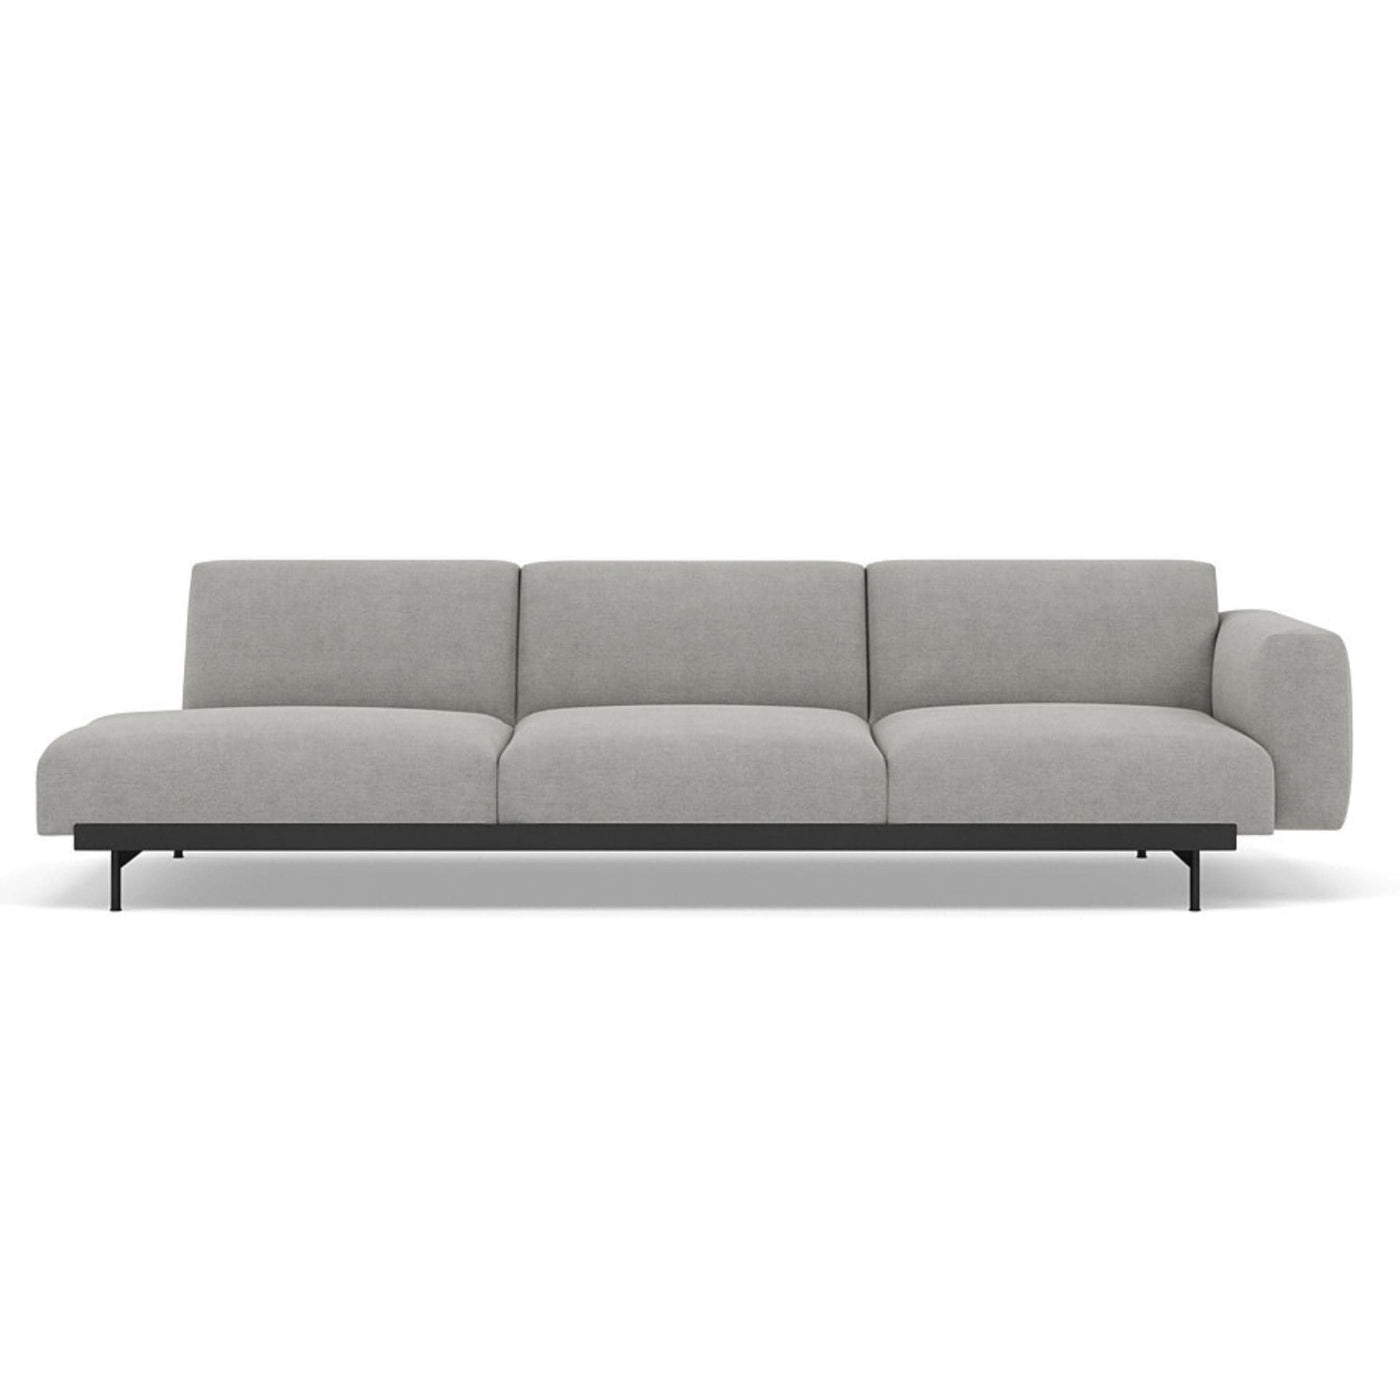 Muuto In Situ Modular 3 Seater Sofa, configuration 2. Made to order from someday designs. #colour_fiord-151